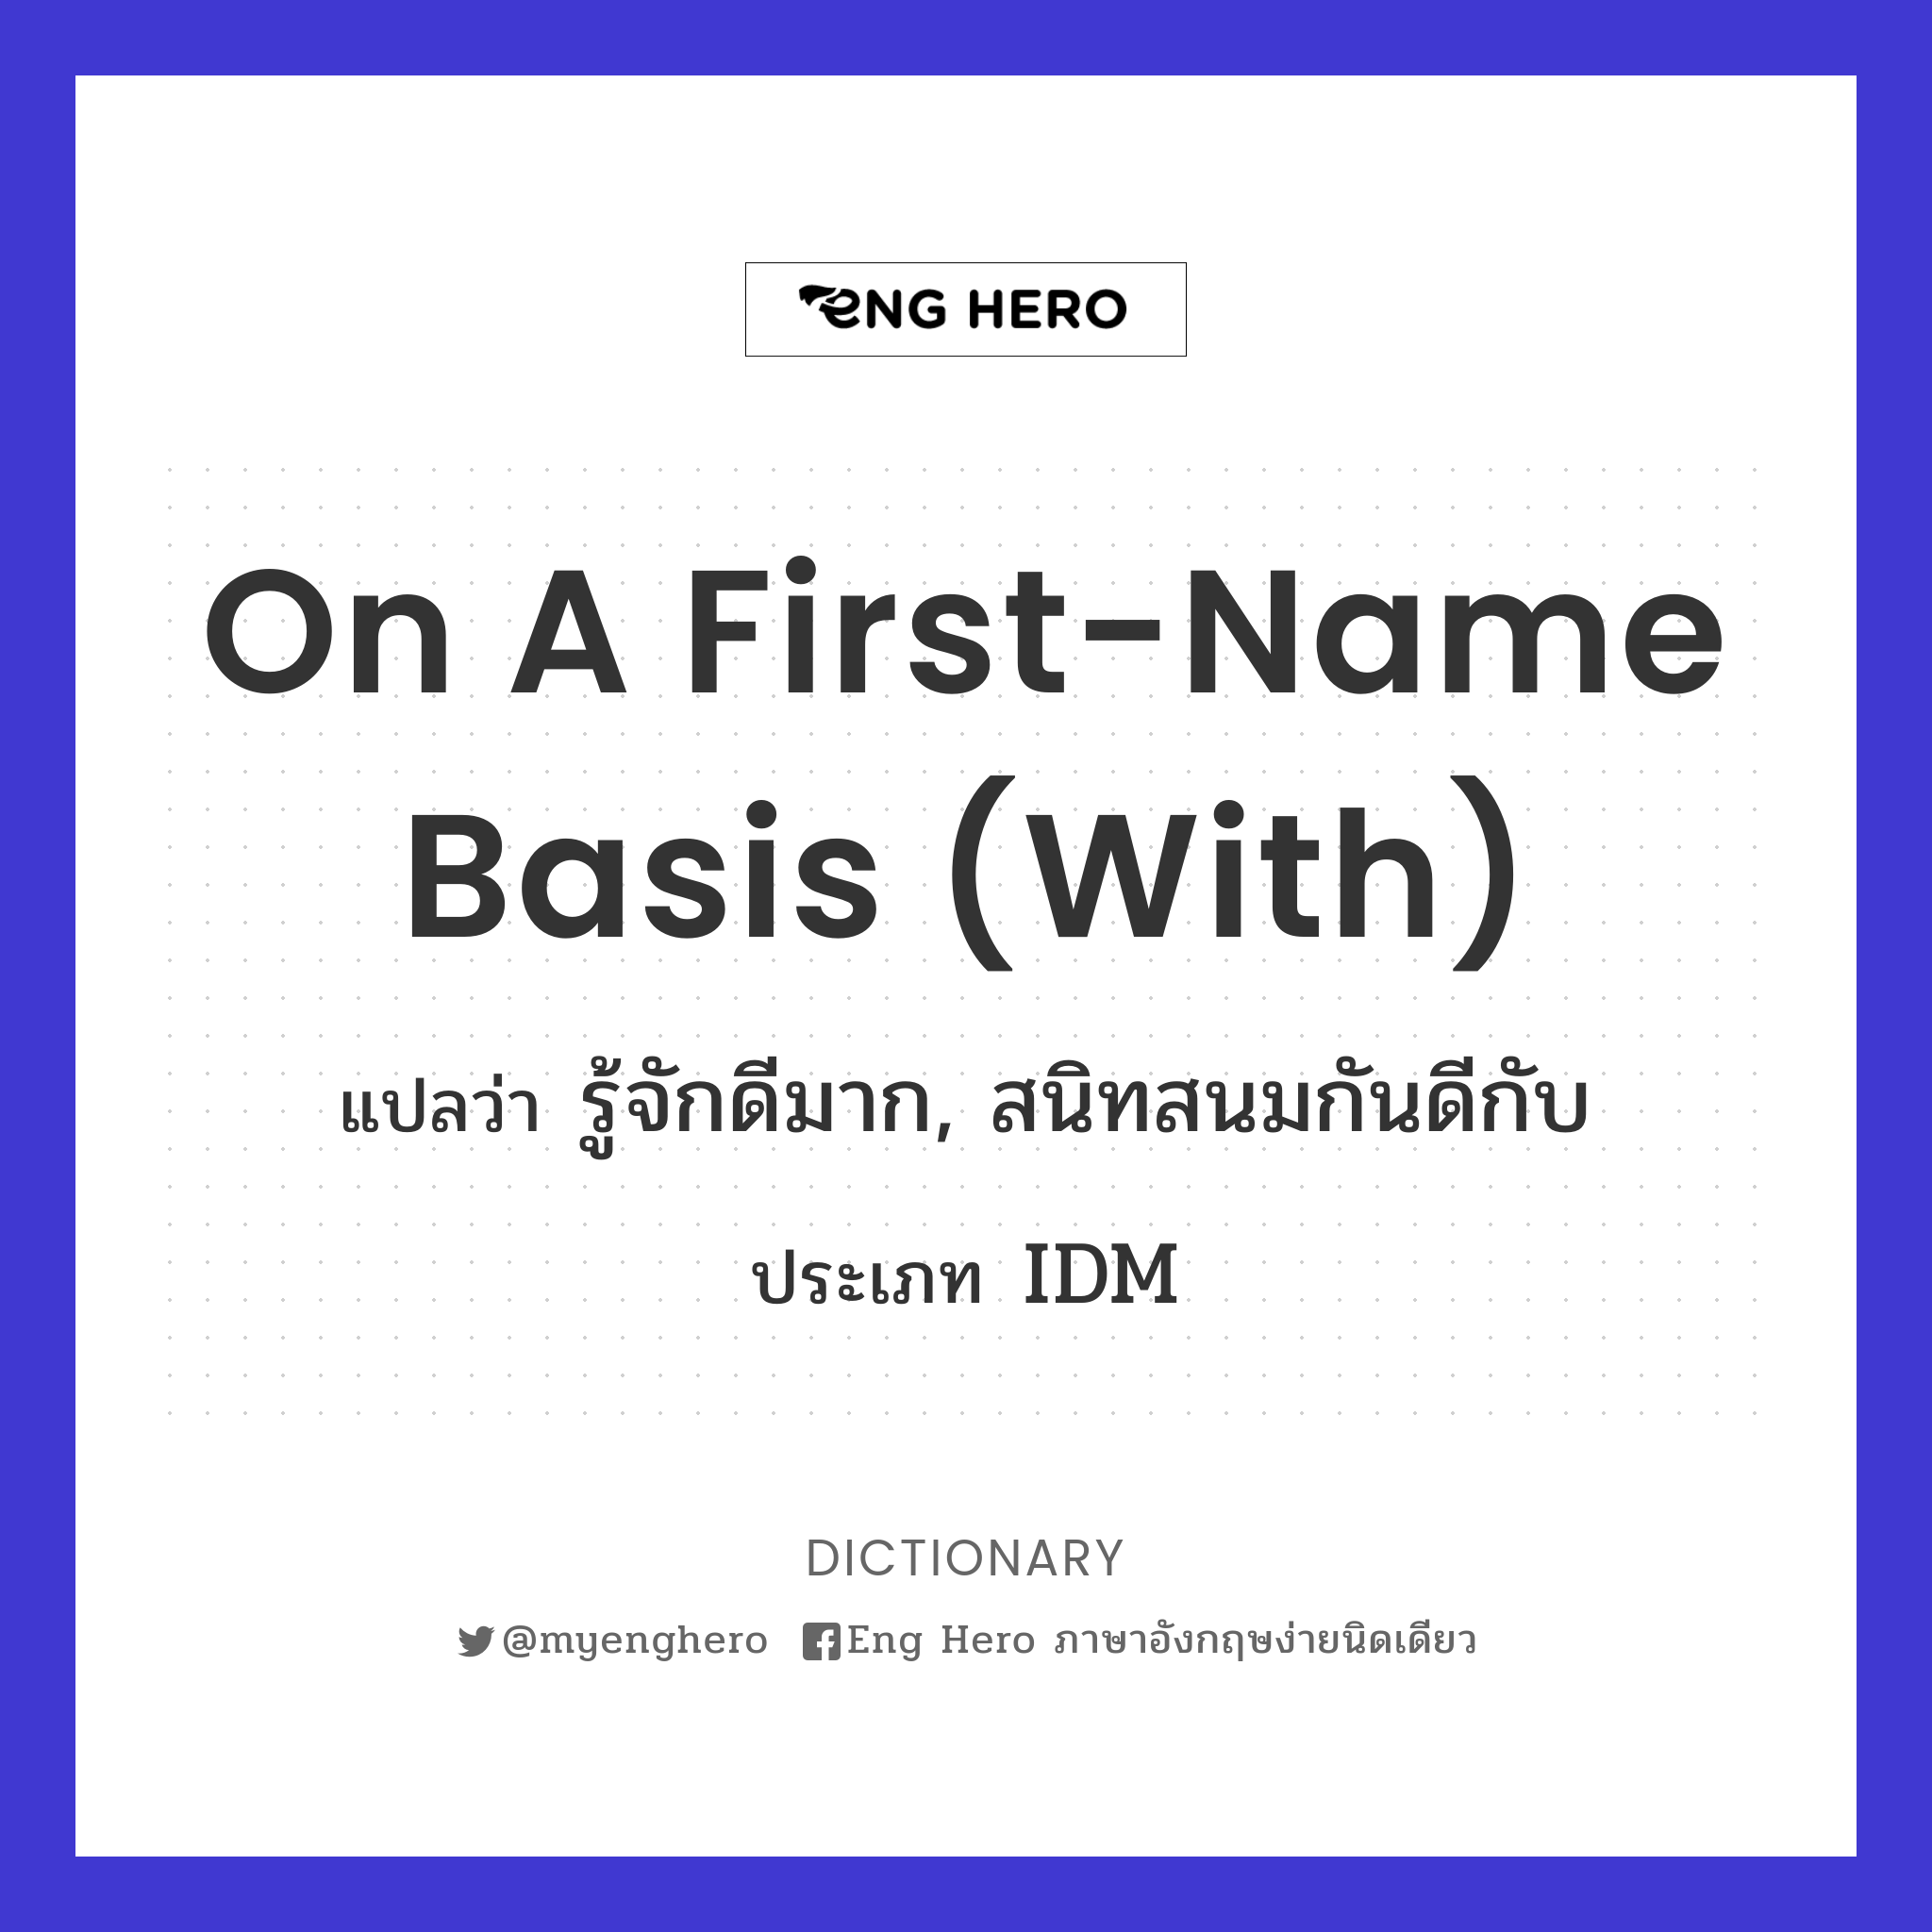 on a first-name basis (with)